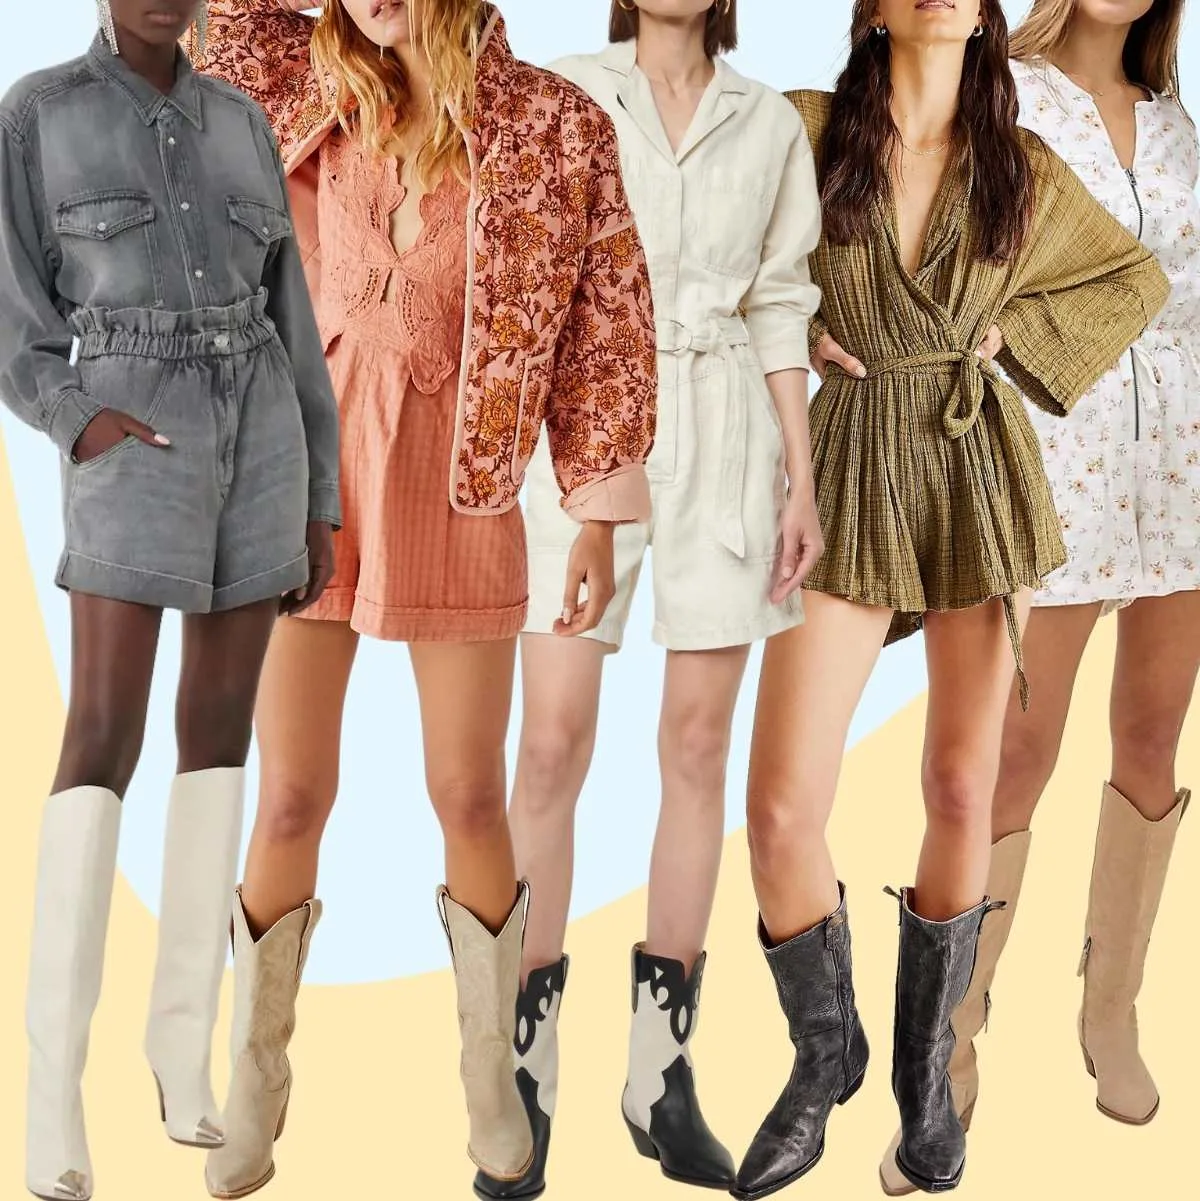 Collage of 5 women wearing different cowboy boots outfits with rompers.